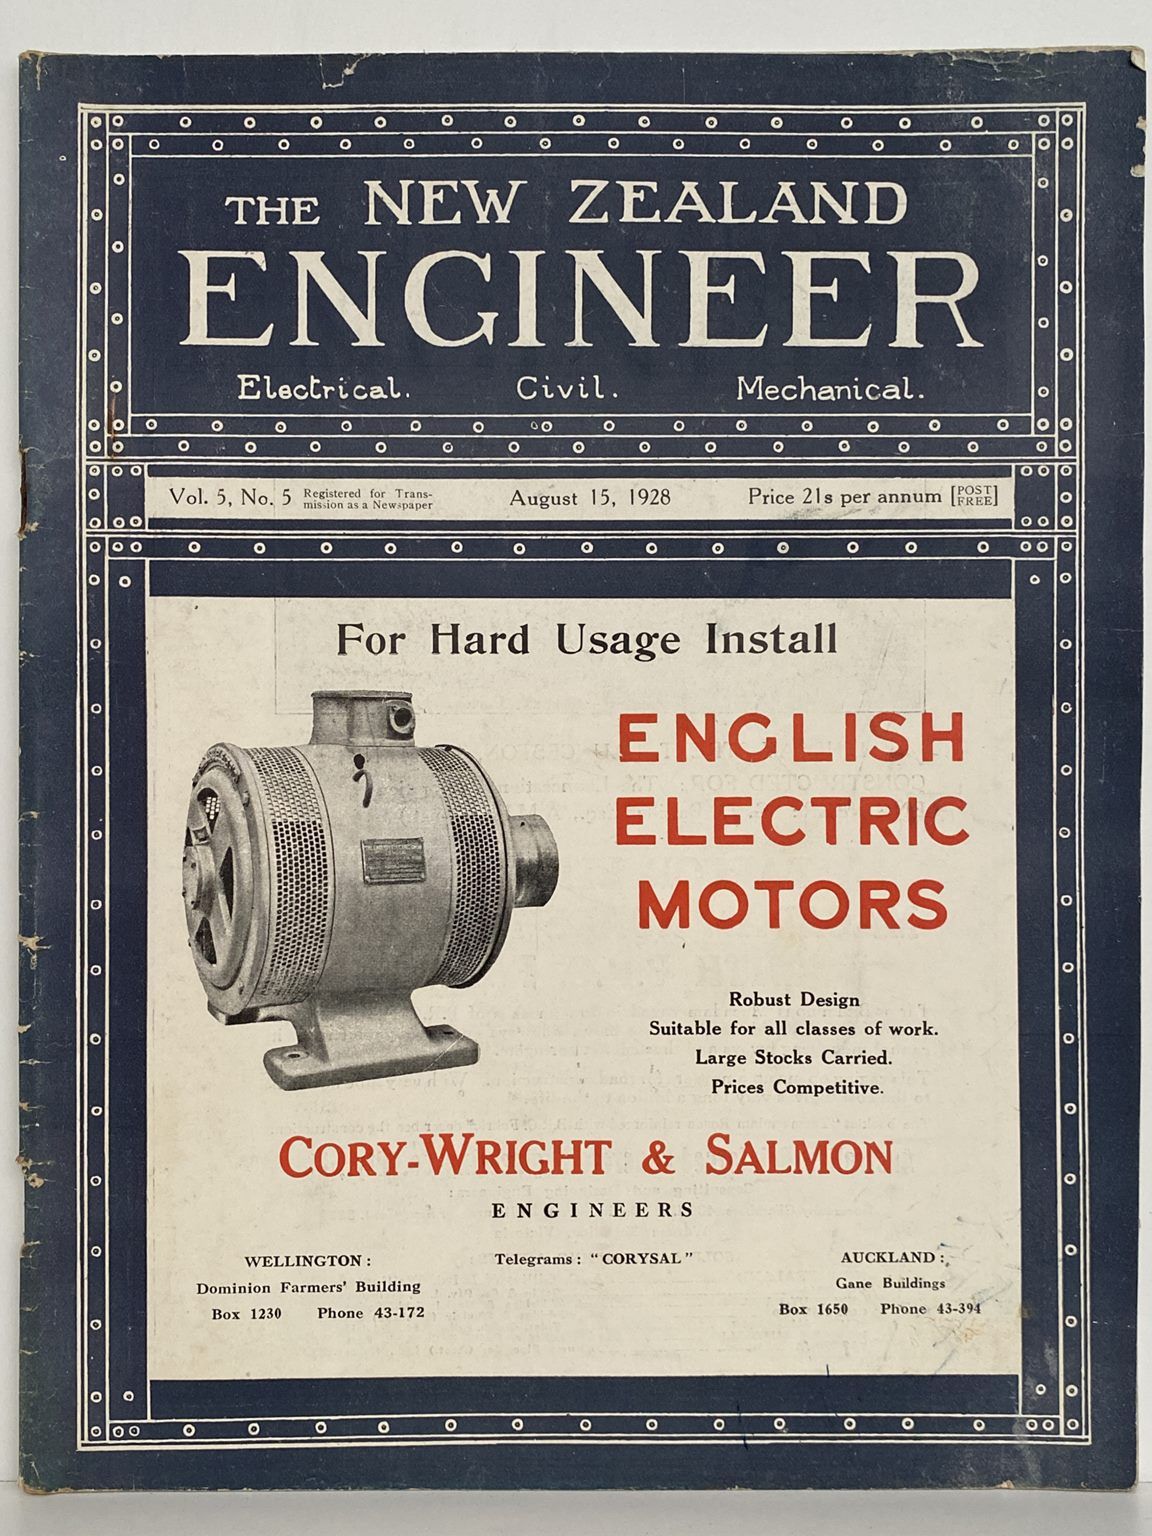 OLD MAGAZINE: The New Zealand Engineer Vol. 5, No. 5 - 15 August 1928